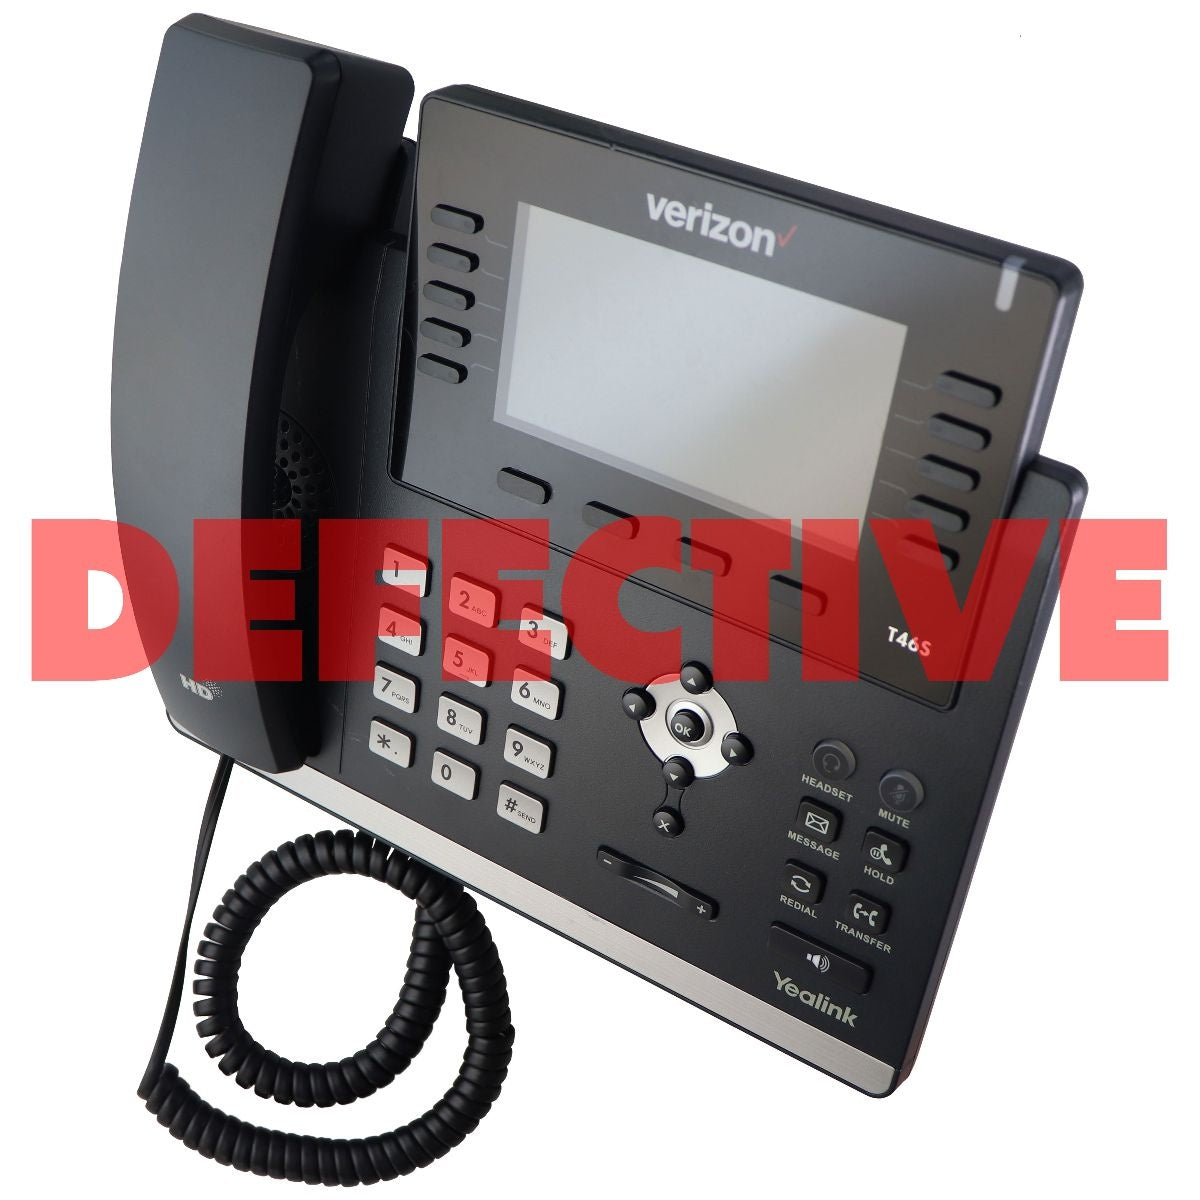 Yealink T46S IP Phone with 4.3-inch LCD and up to 16 Lines - Black Home Telephones & Accessories - Corded Telephones Yealink    - Simple Cell Bulk Wholesale Pricing - USA Seller